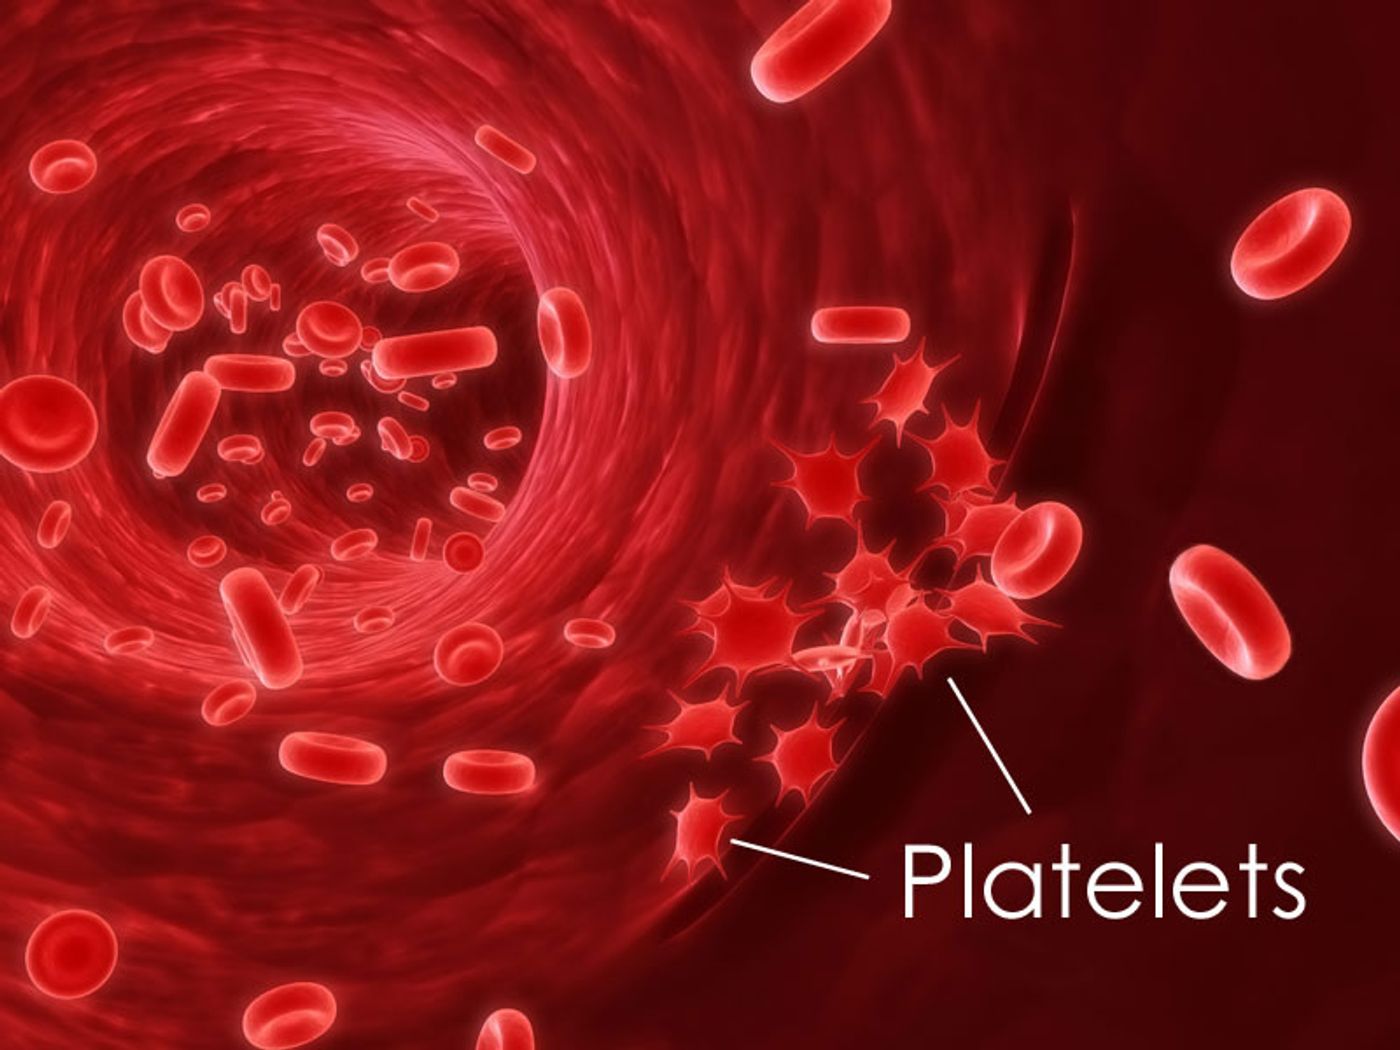 Platelets are derived from megakaryocytes in the bone marrow and aid in clotting. (Public Domain)